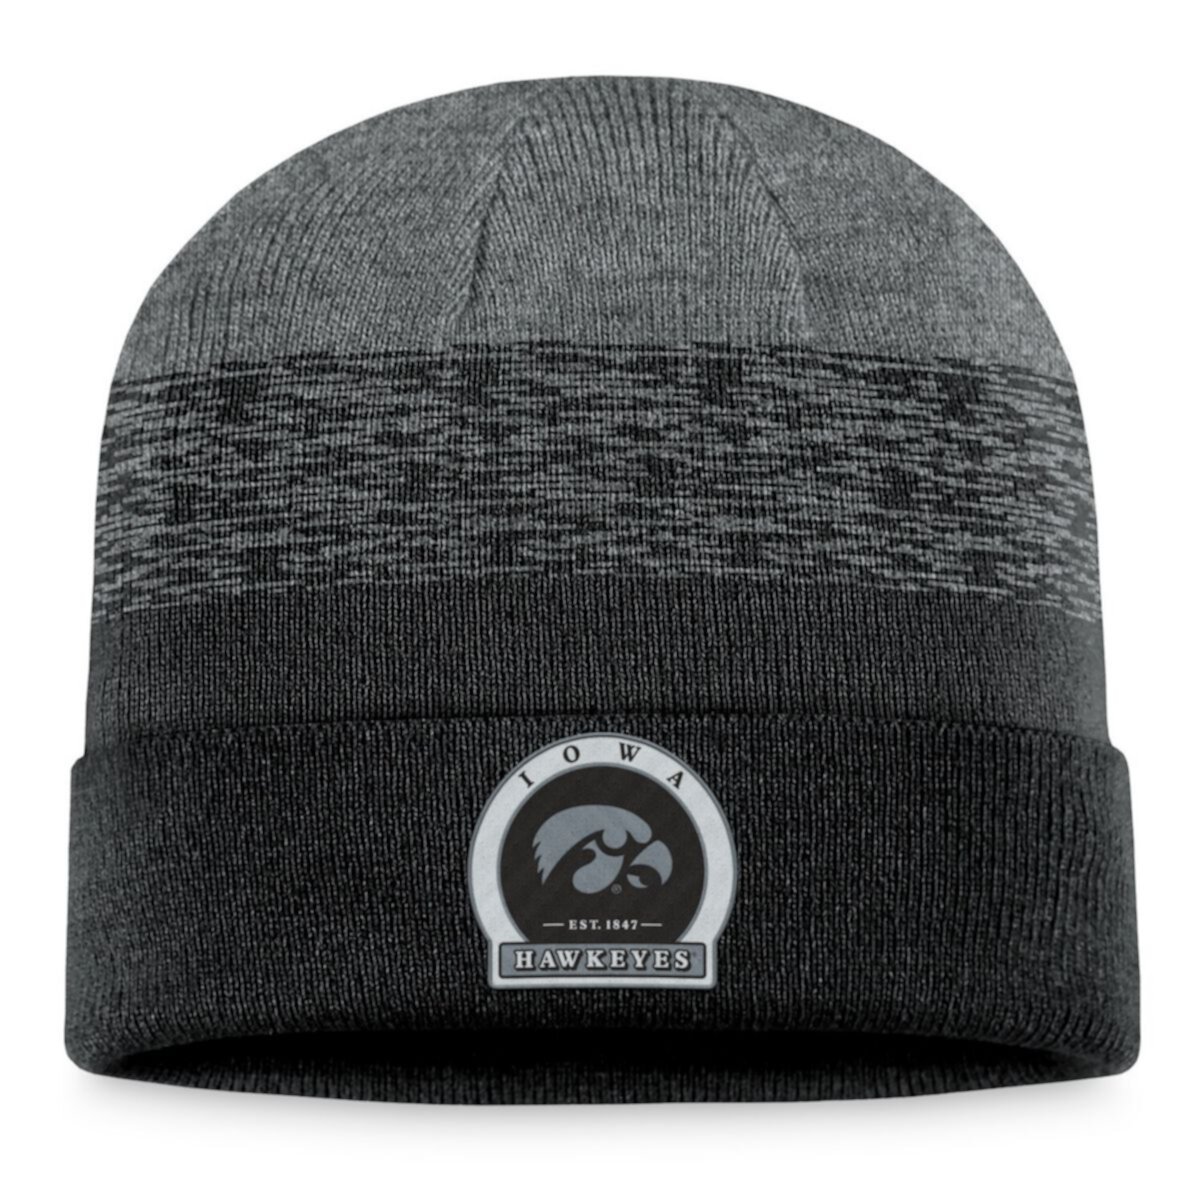 Men's Top of the World Heather Black Iowa Hawkeyes Frostbite Cuffed Knit Hat Top of the World